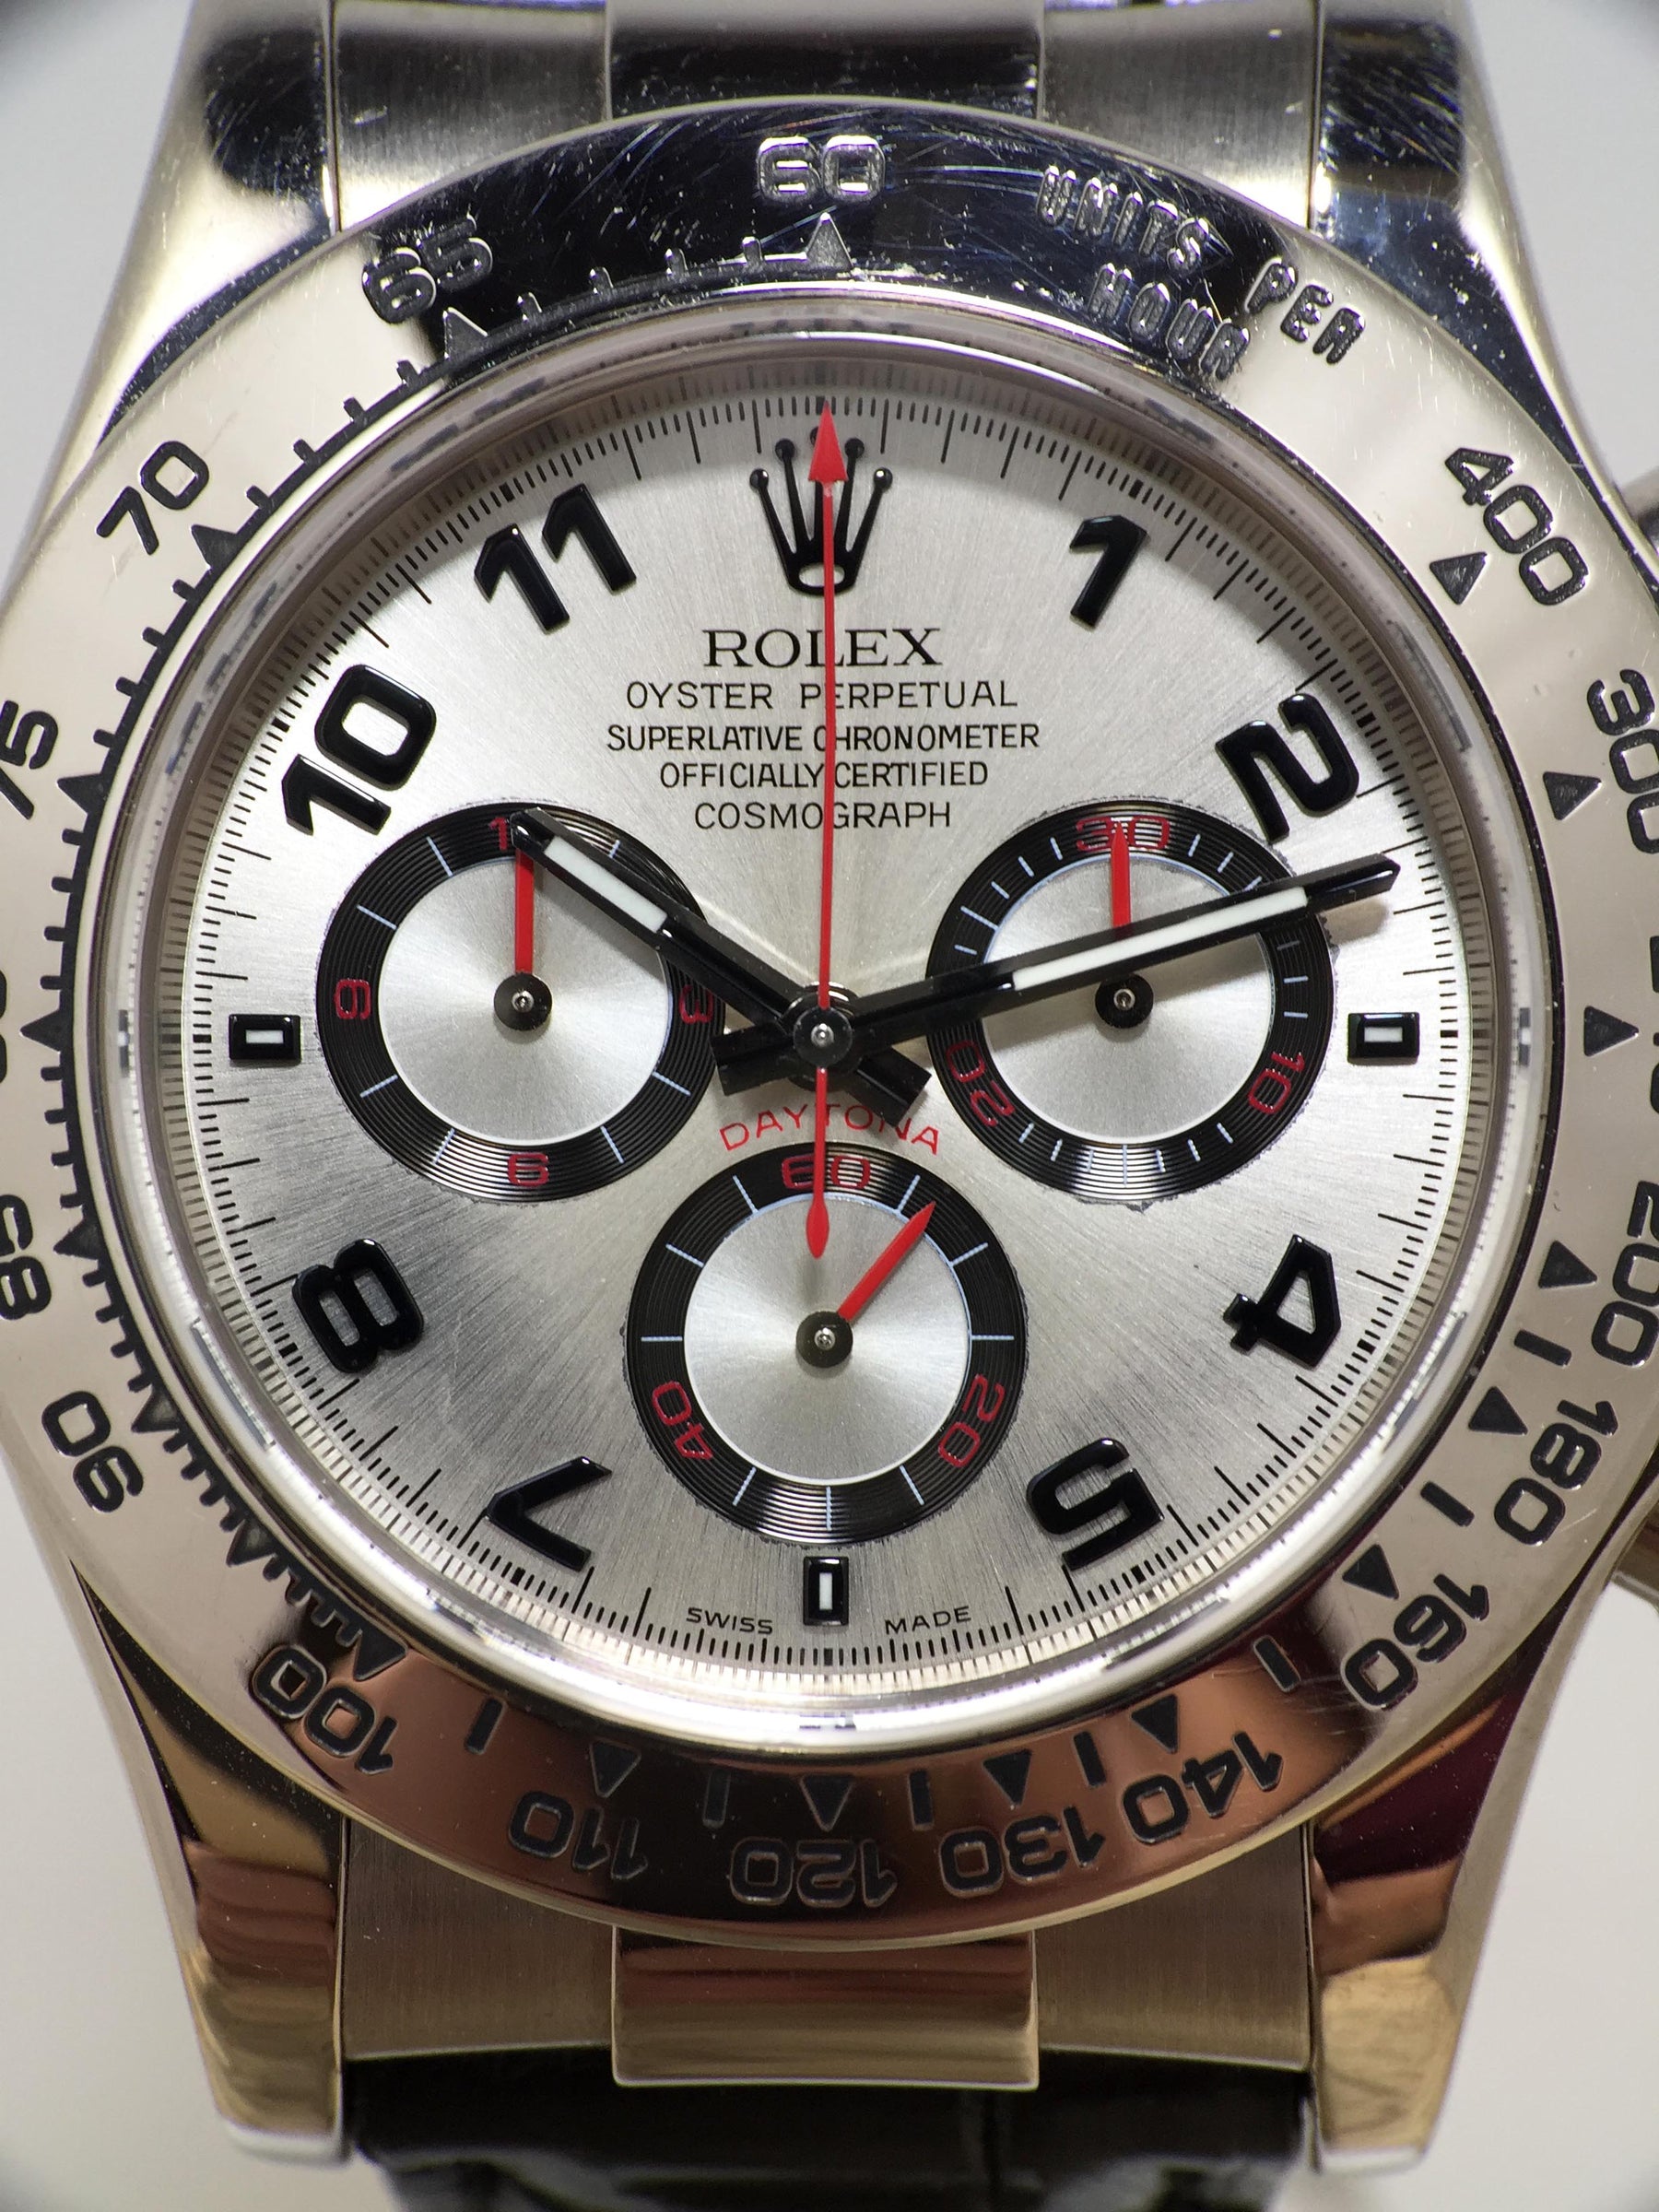 2003 Rolex Daytona Racing Dial Ref. 116519 (with Papers)